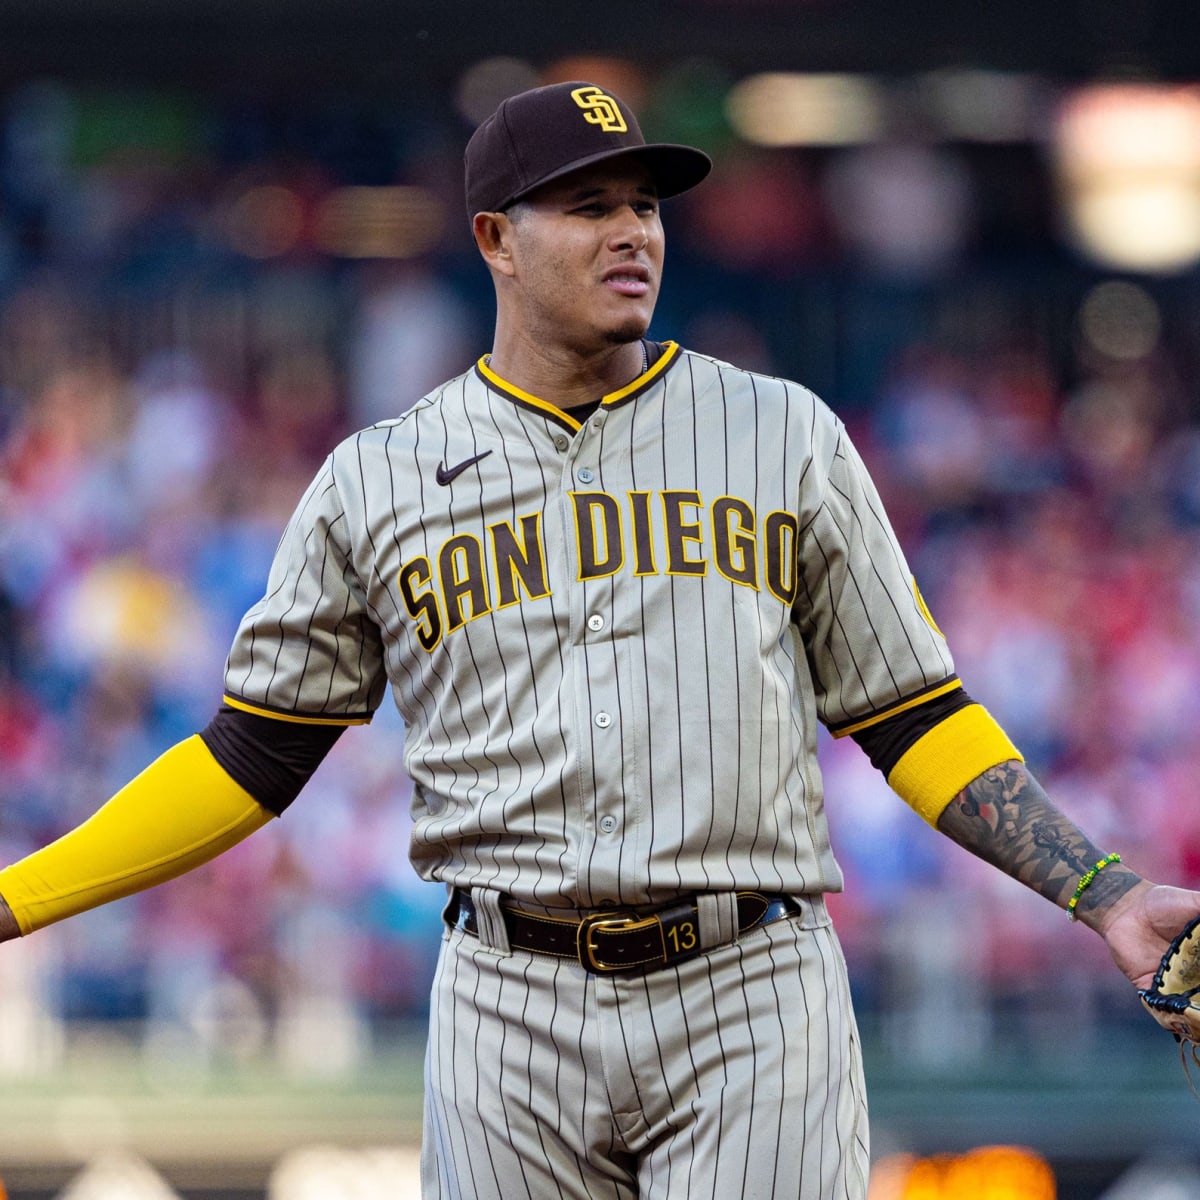 San Diego Padres 3B Manny Machado Expected to be Traded to New